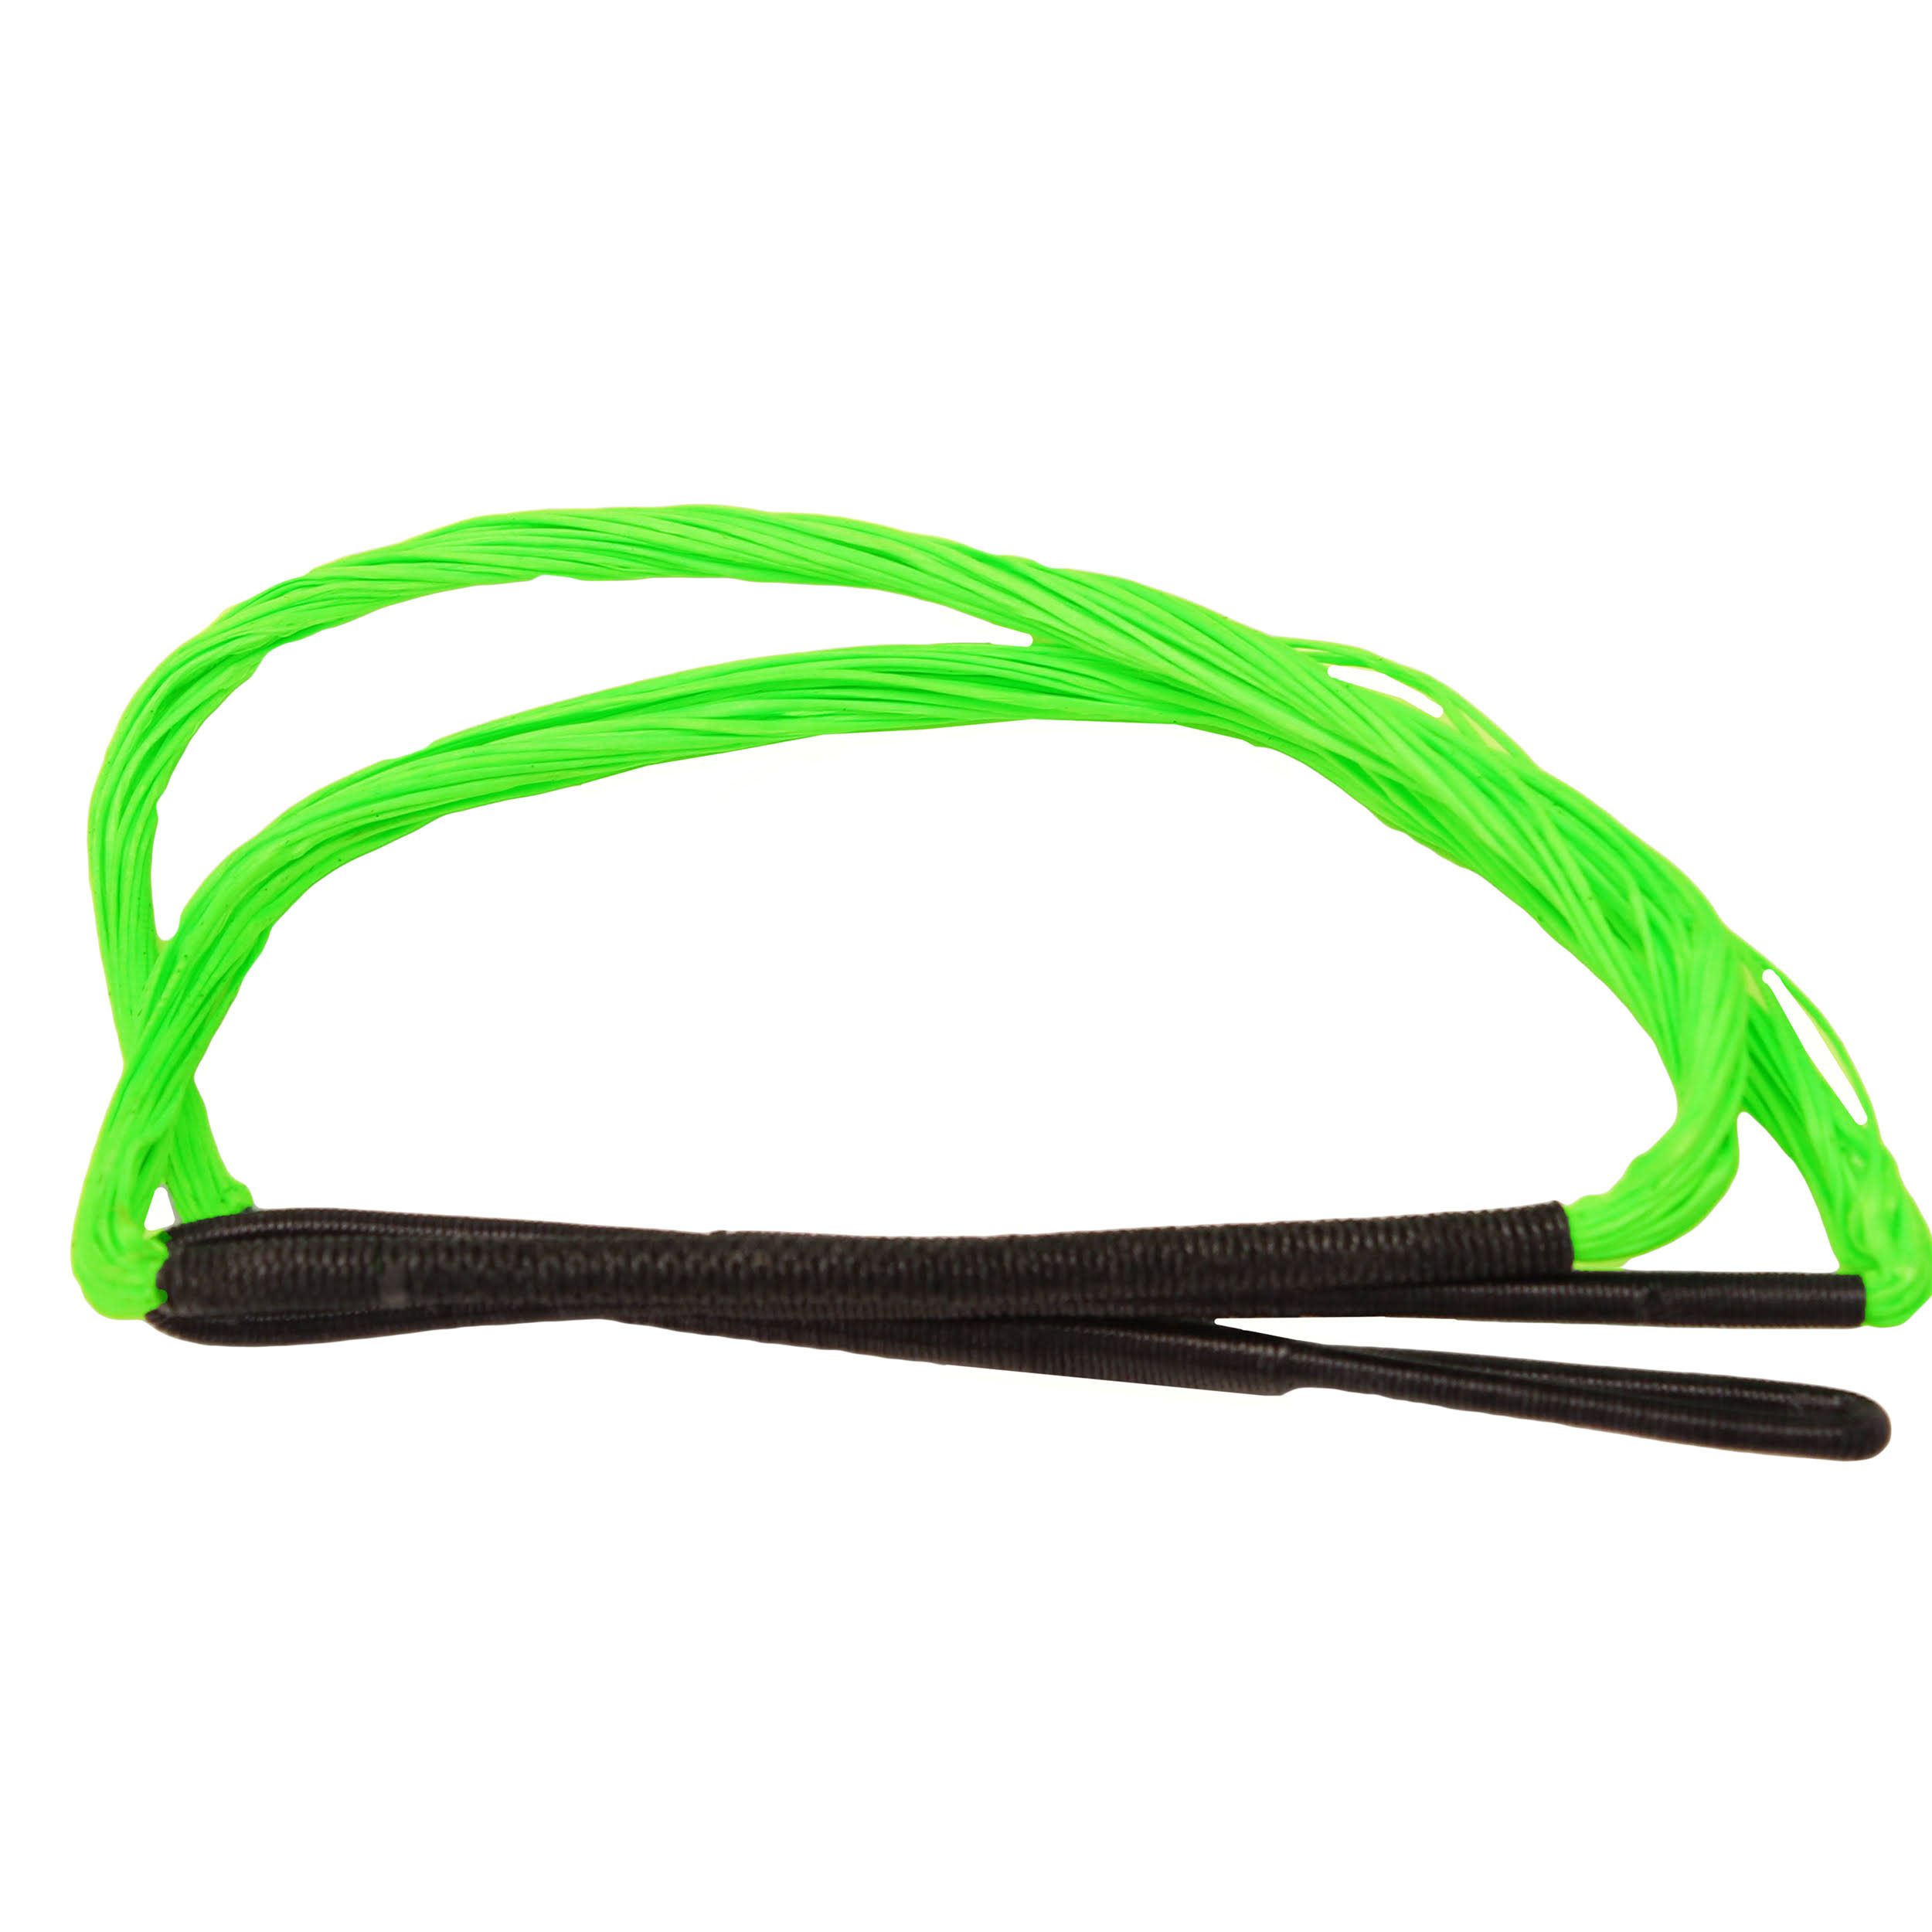 Excalibur Crossbow Micro String - Zombie Green